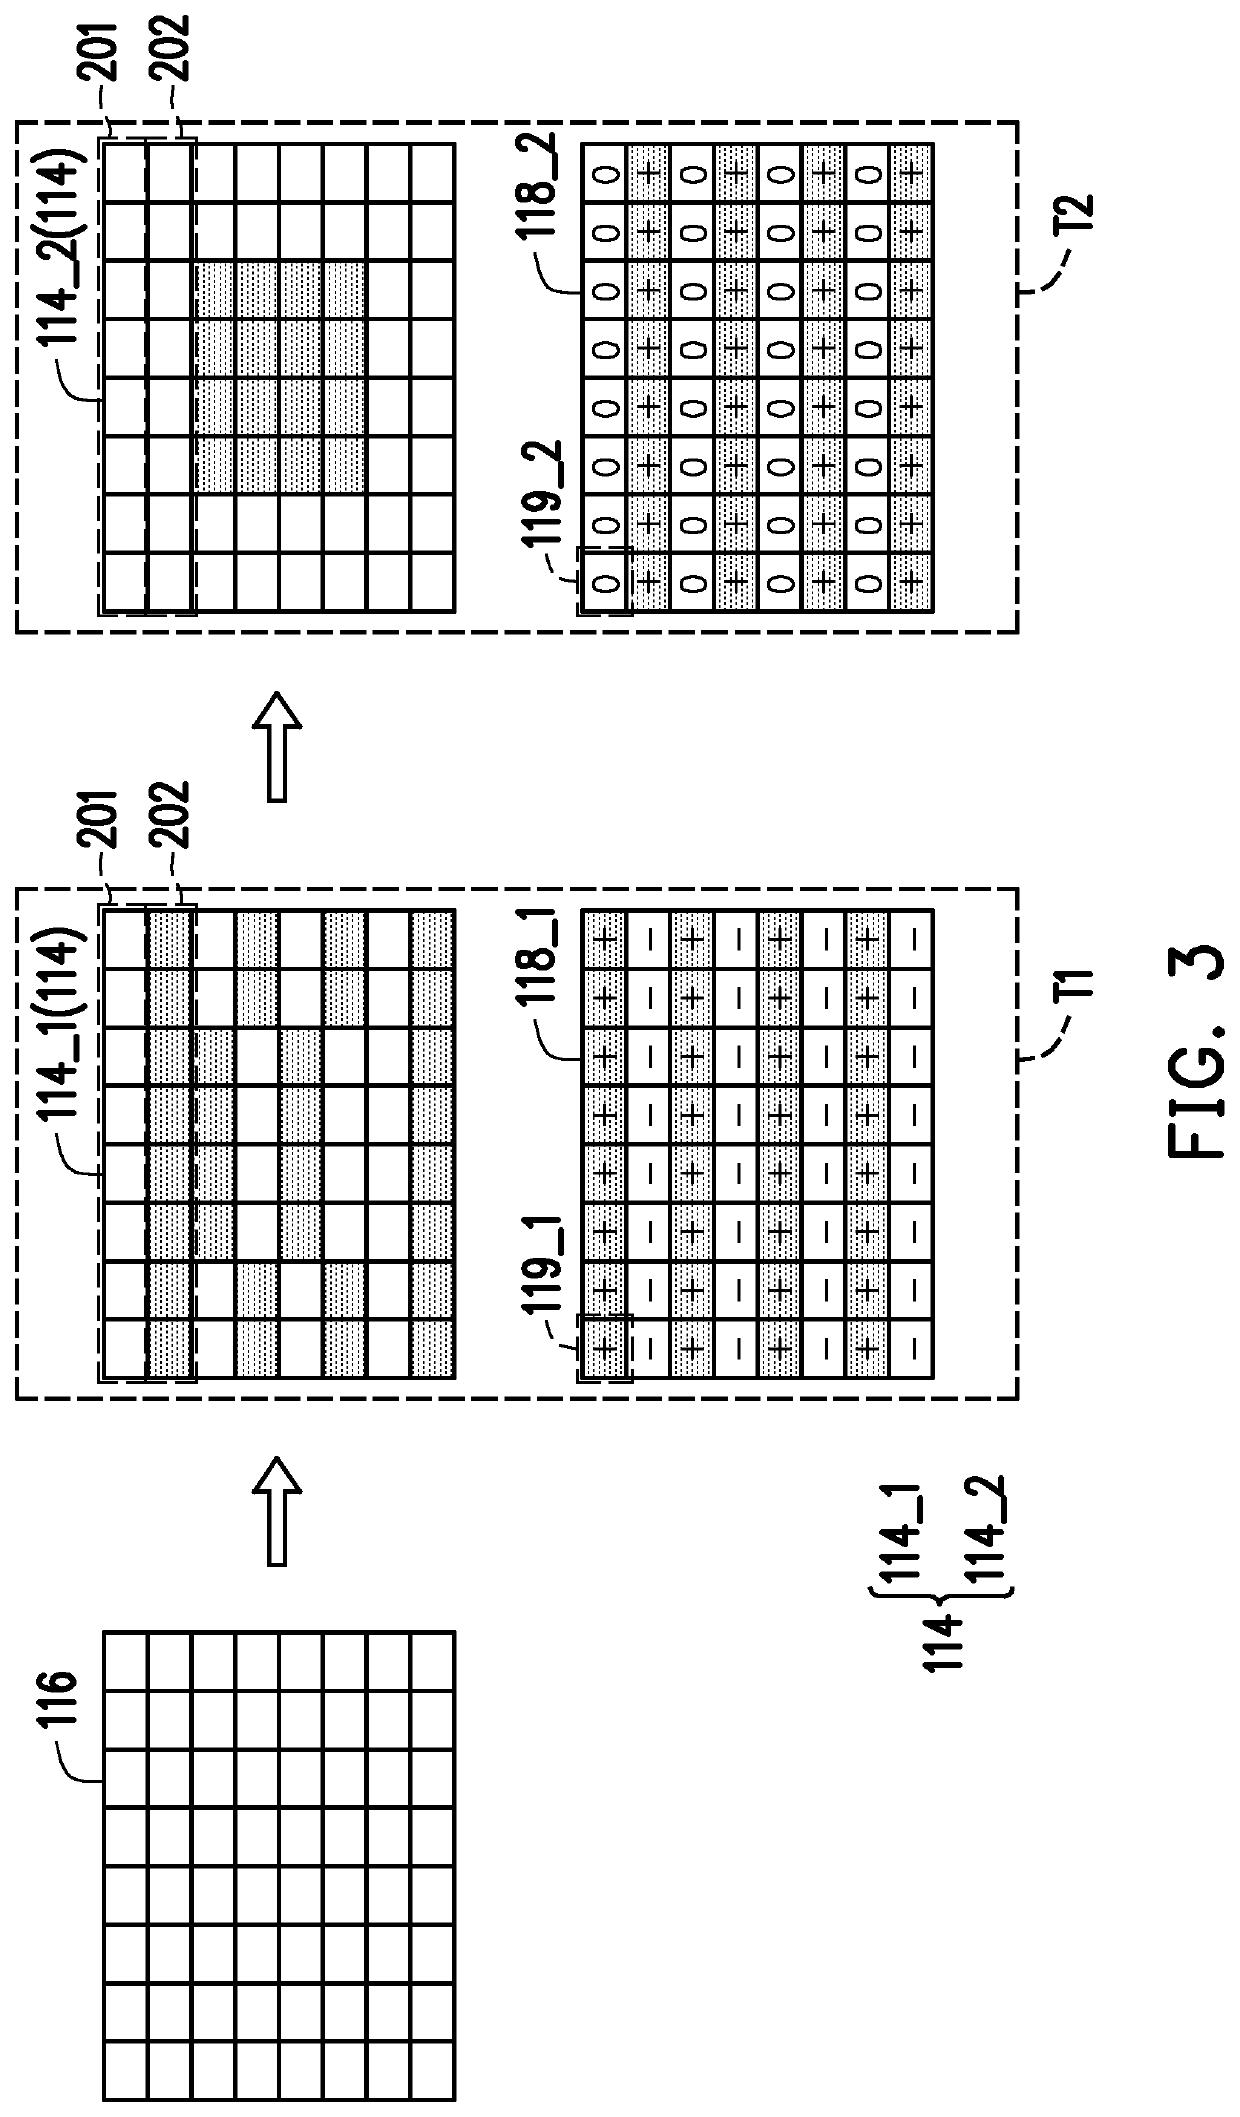 E-paper display device and a method for driving an e-paper display panel